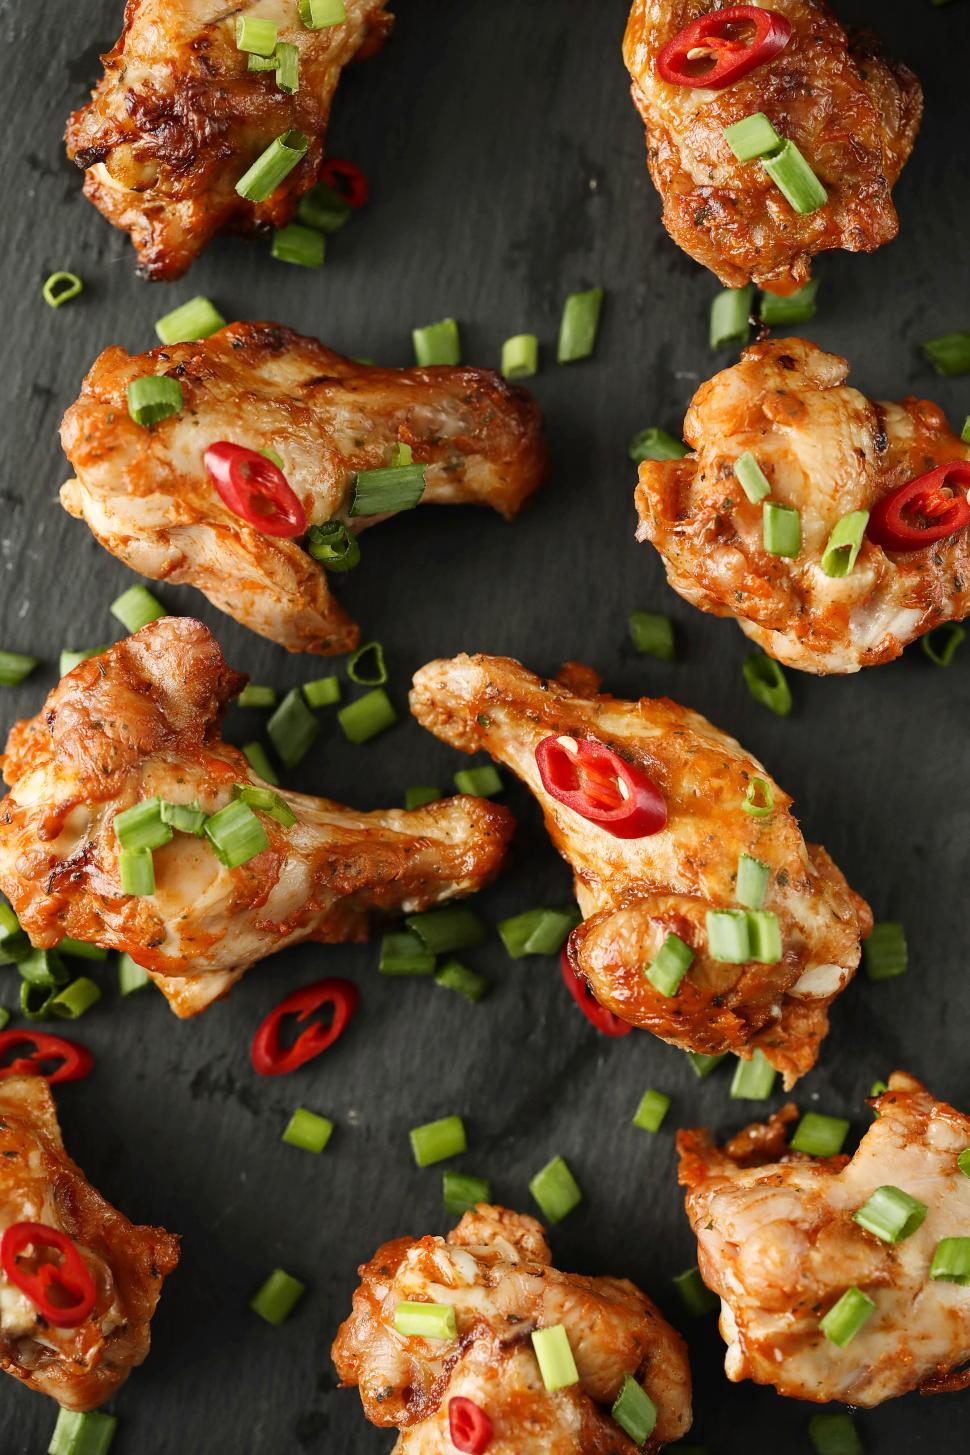 Free Image of Roasted chicken legs with garnish 